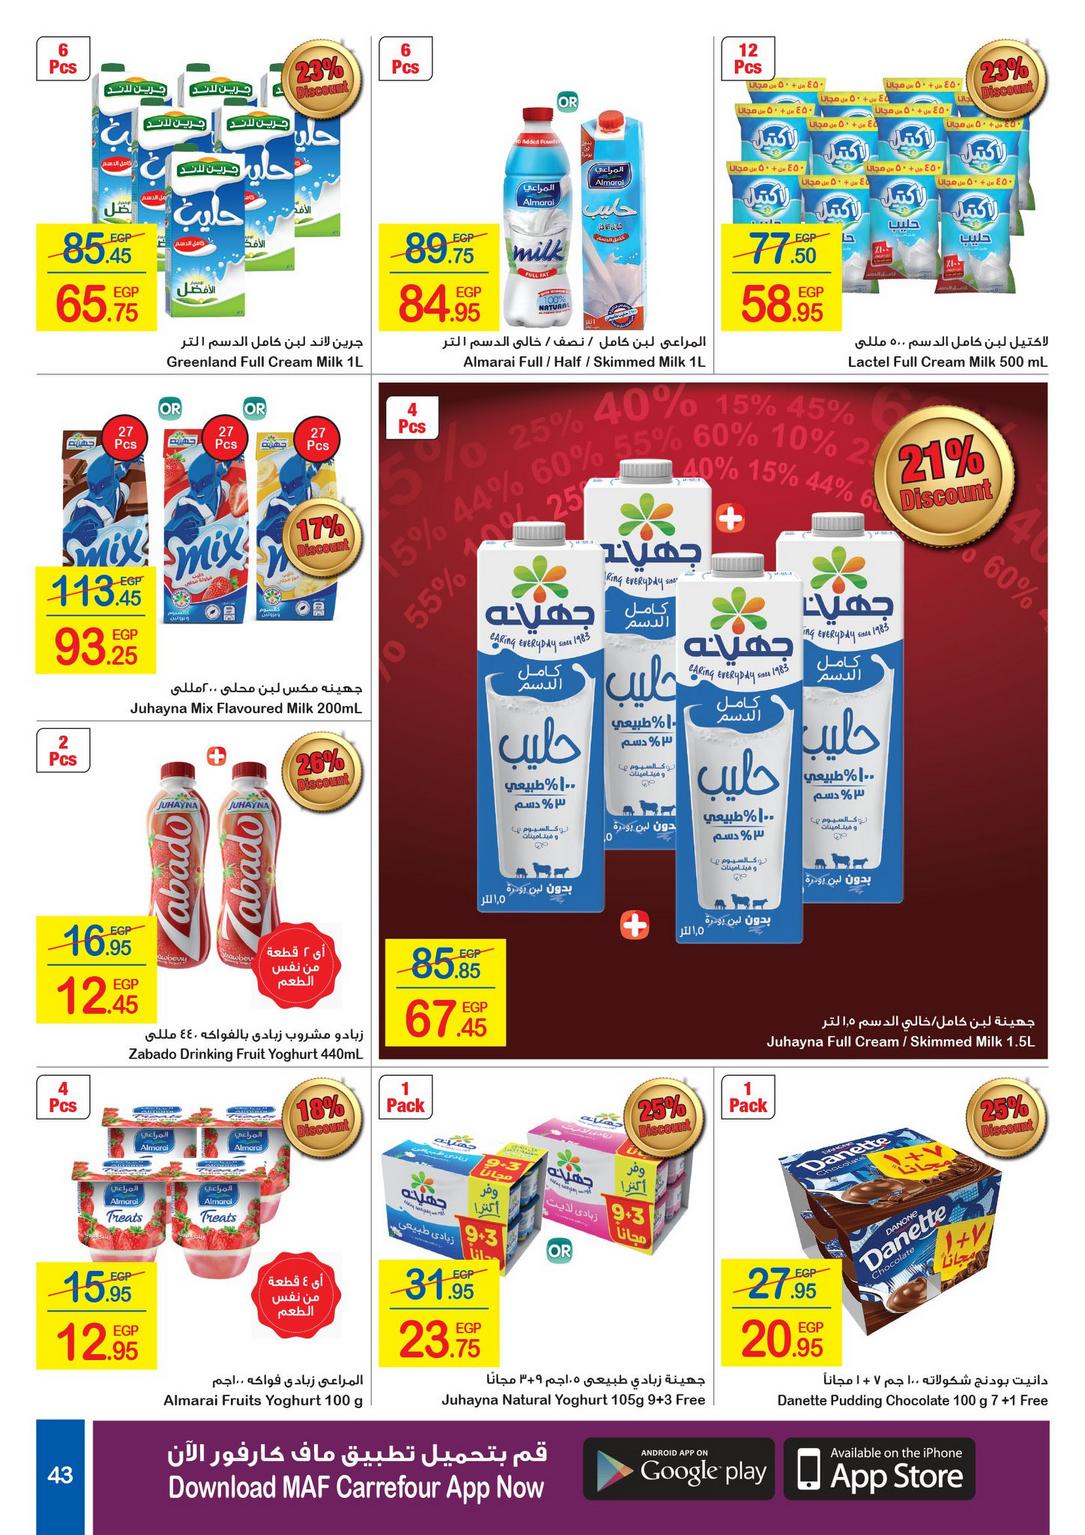 Carrefour Deals from 1/1 till 14/1 | Carrefour Egypt 44